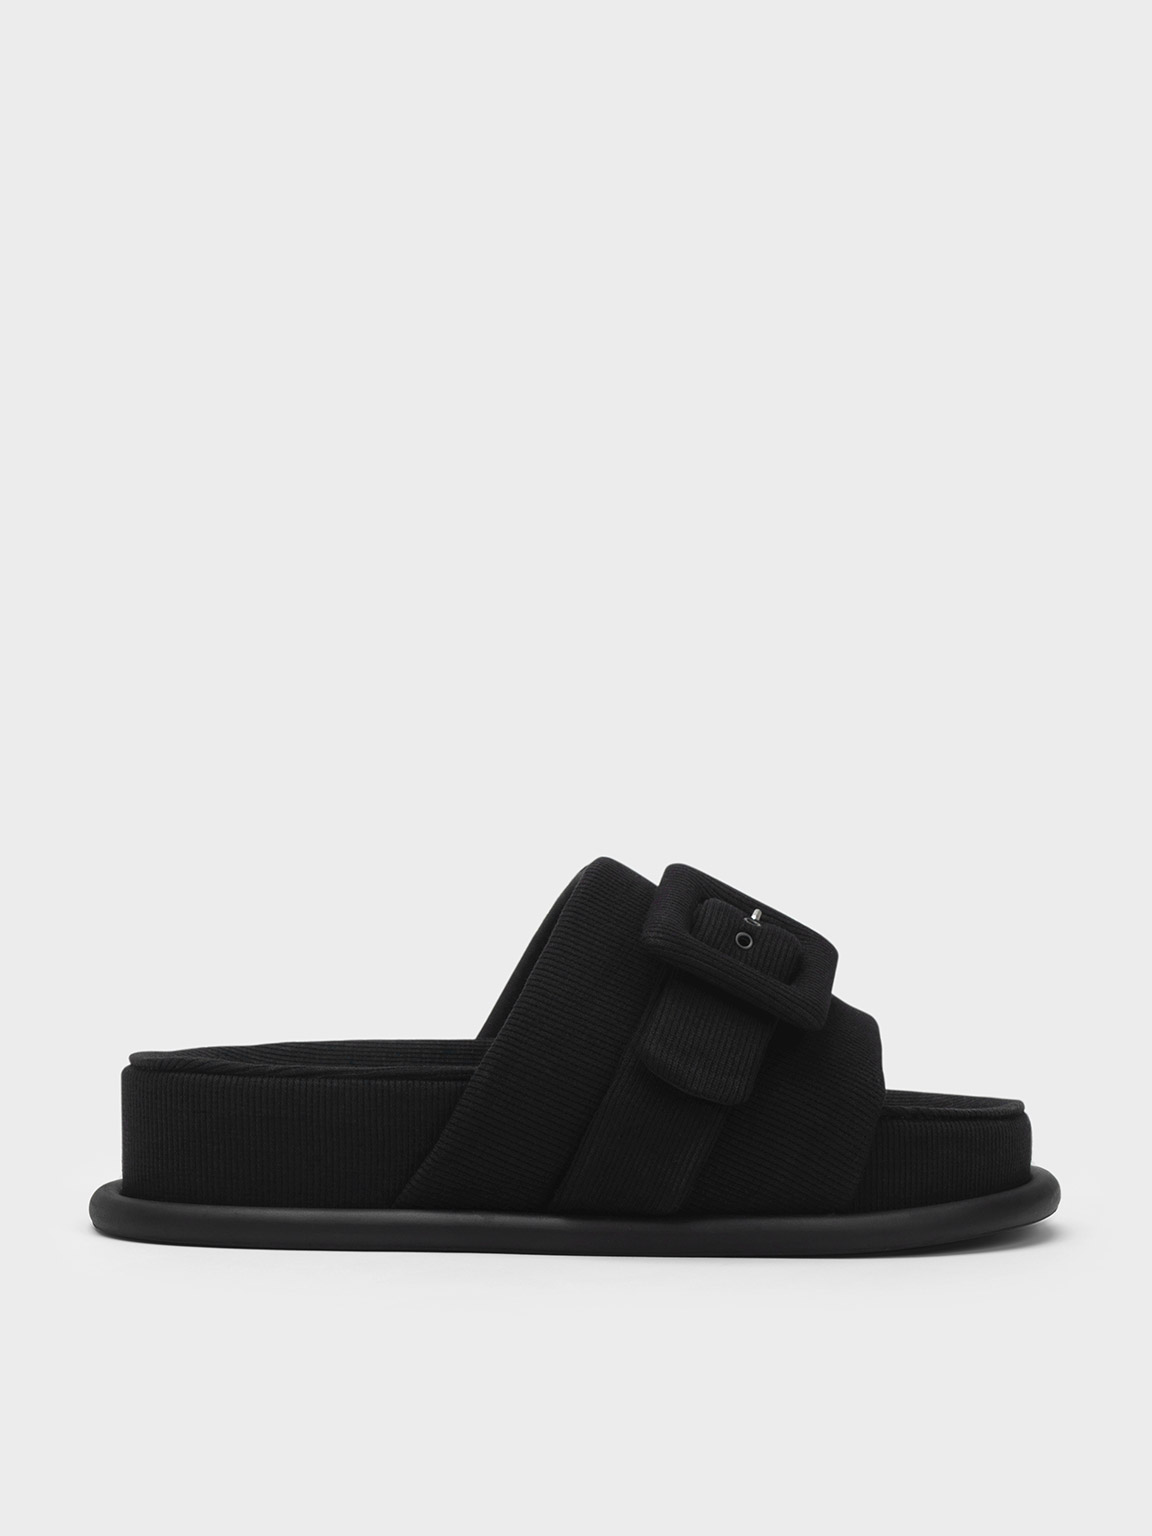 Charles & Keith Woven Buckled Slide Sandals In Black